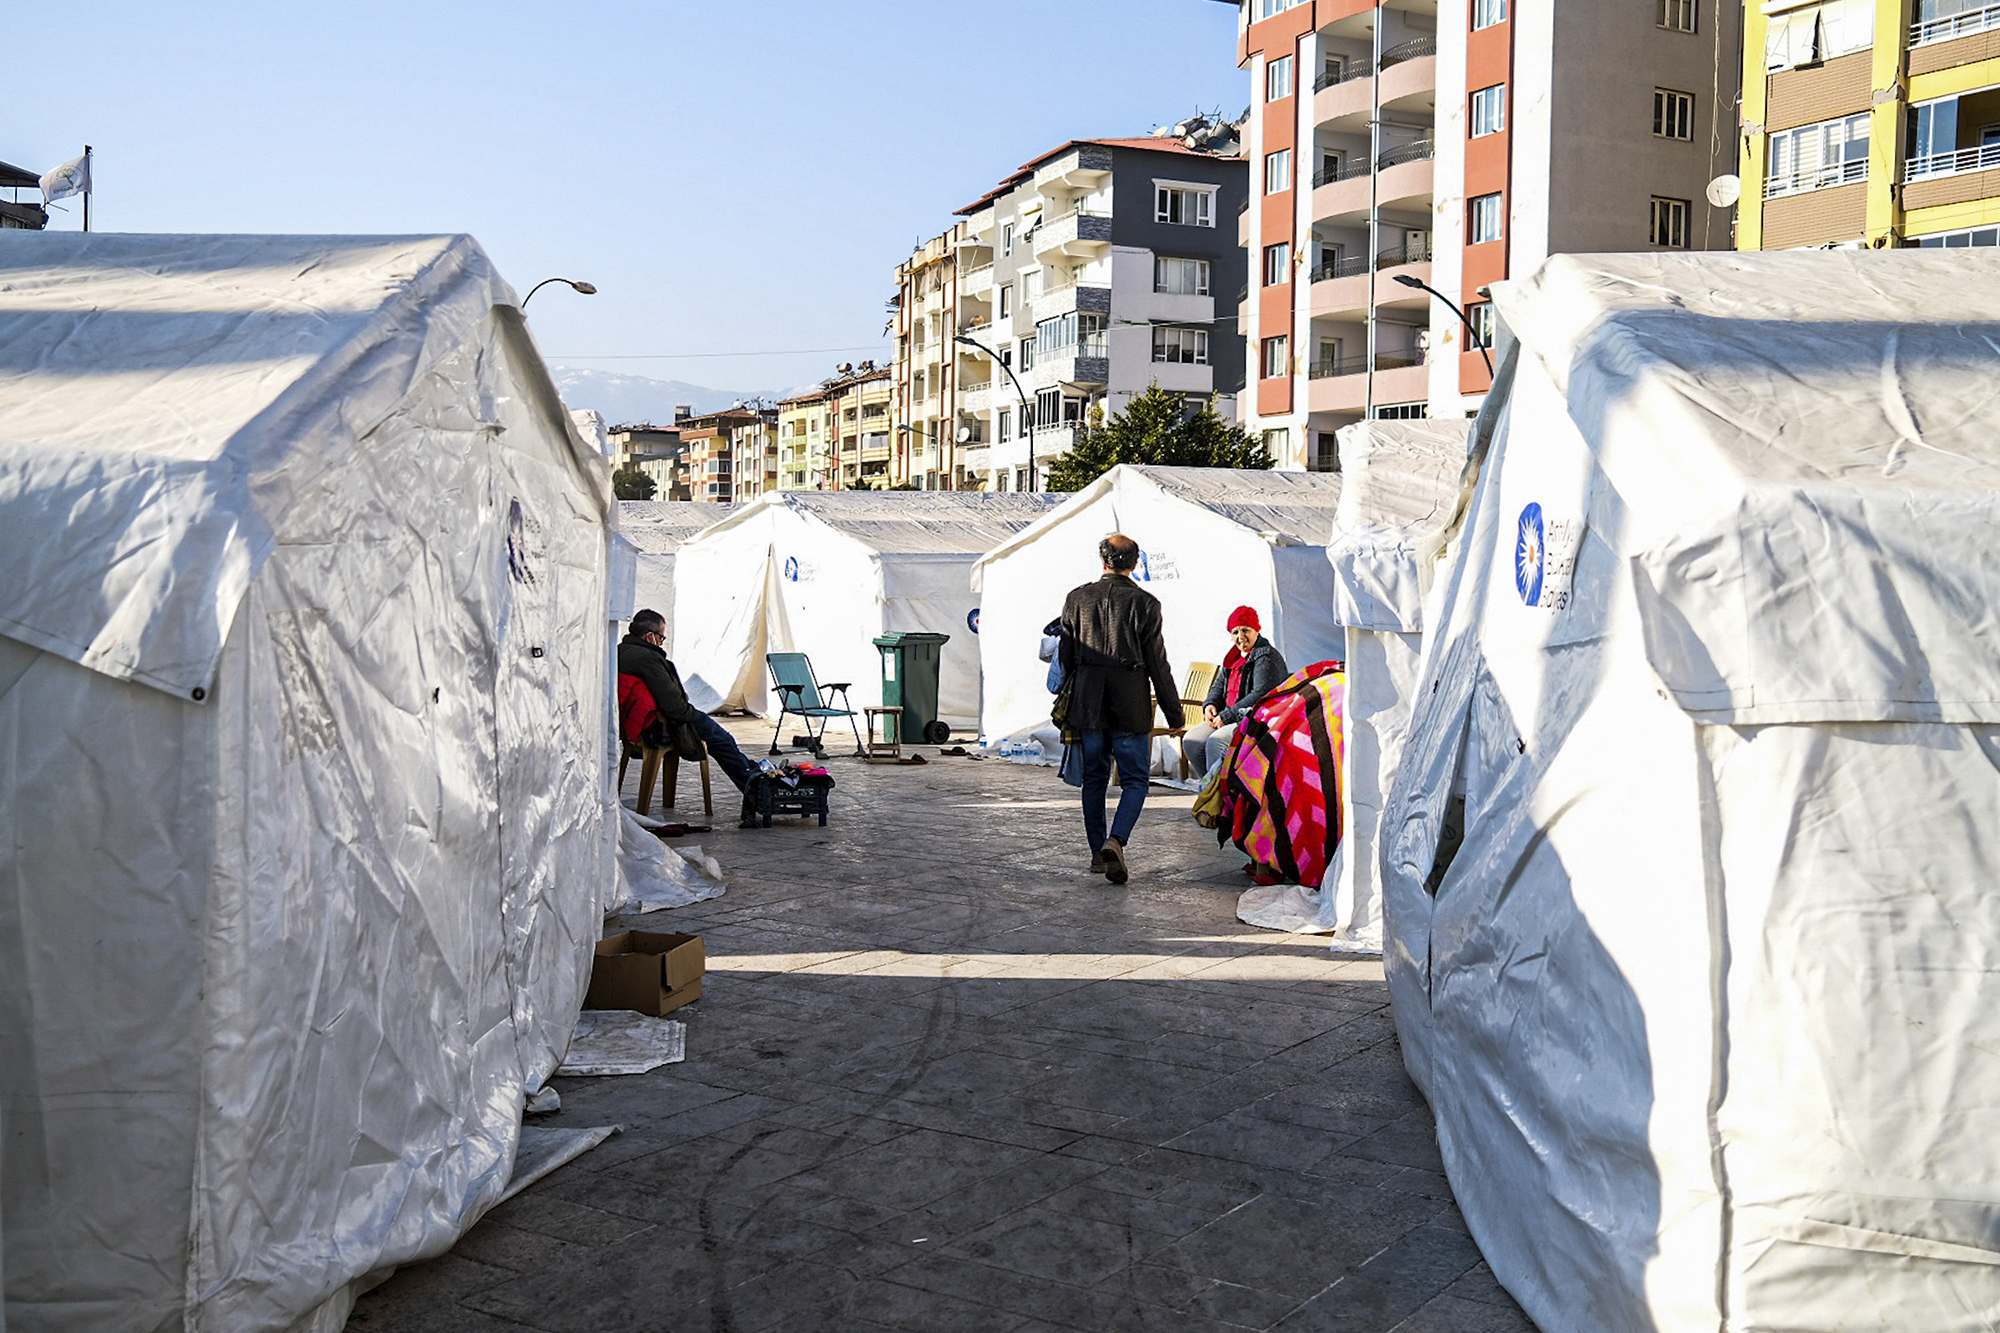 Temporary shelters erected as a place for injured to received assistance. Two people sit outside, and a third walks toward them.